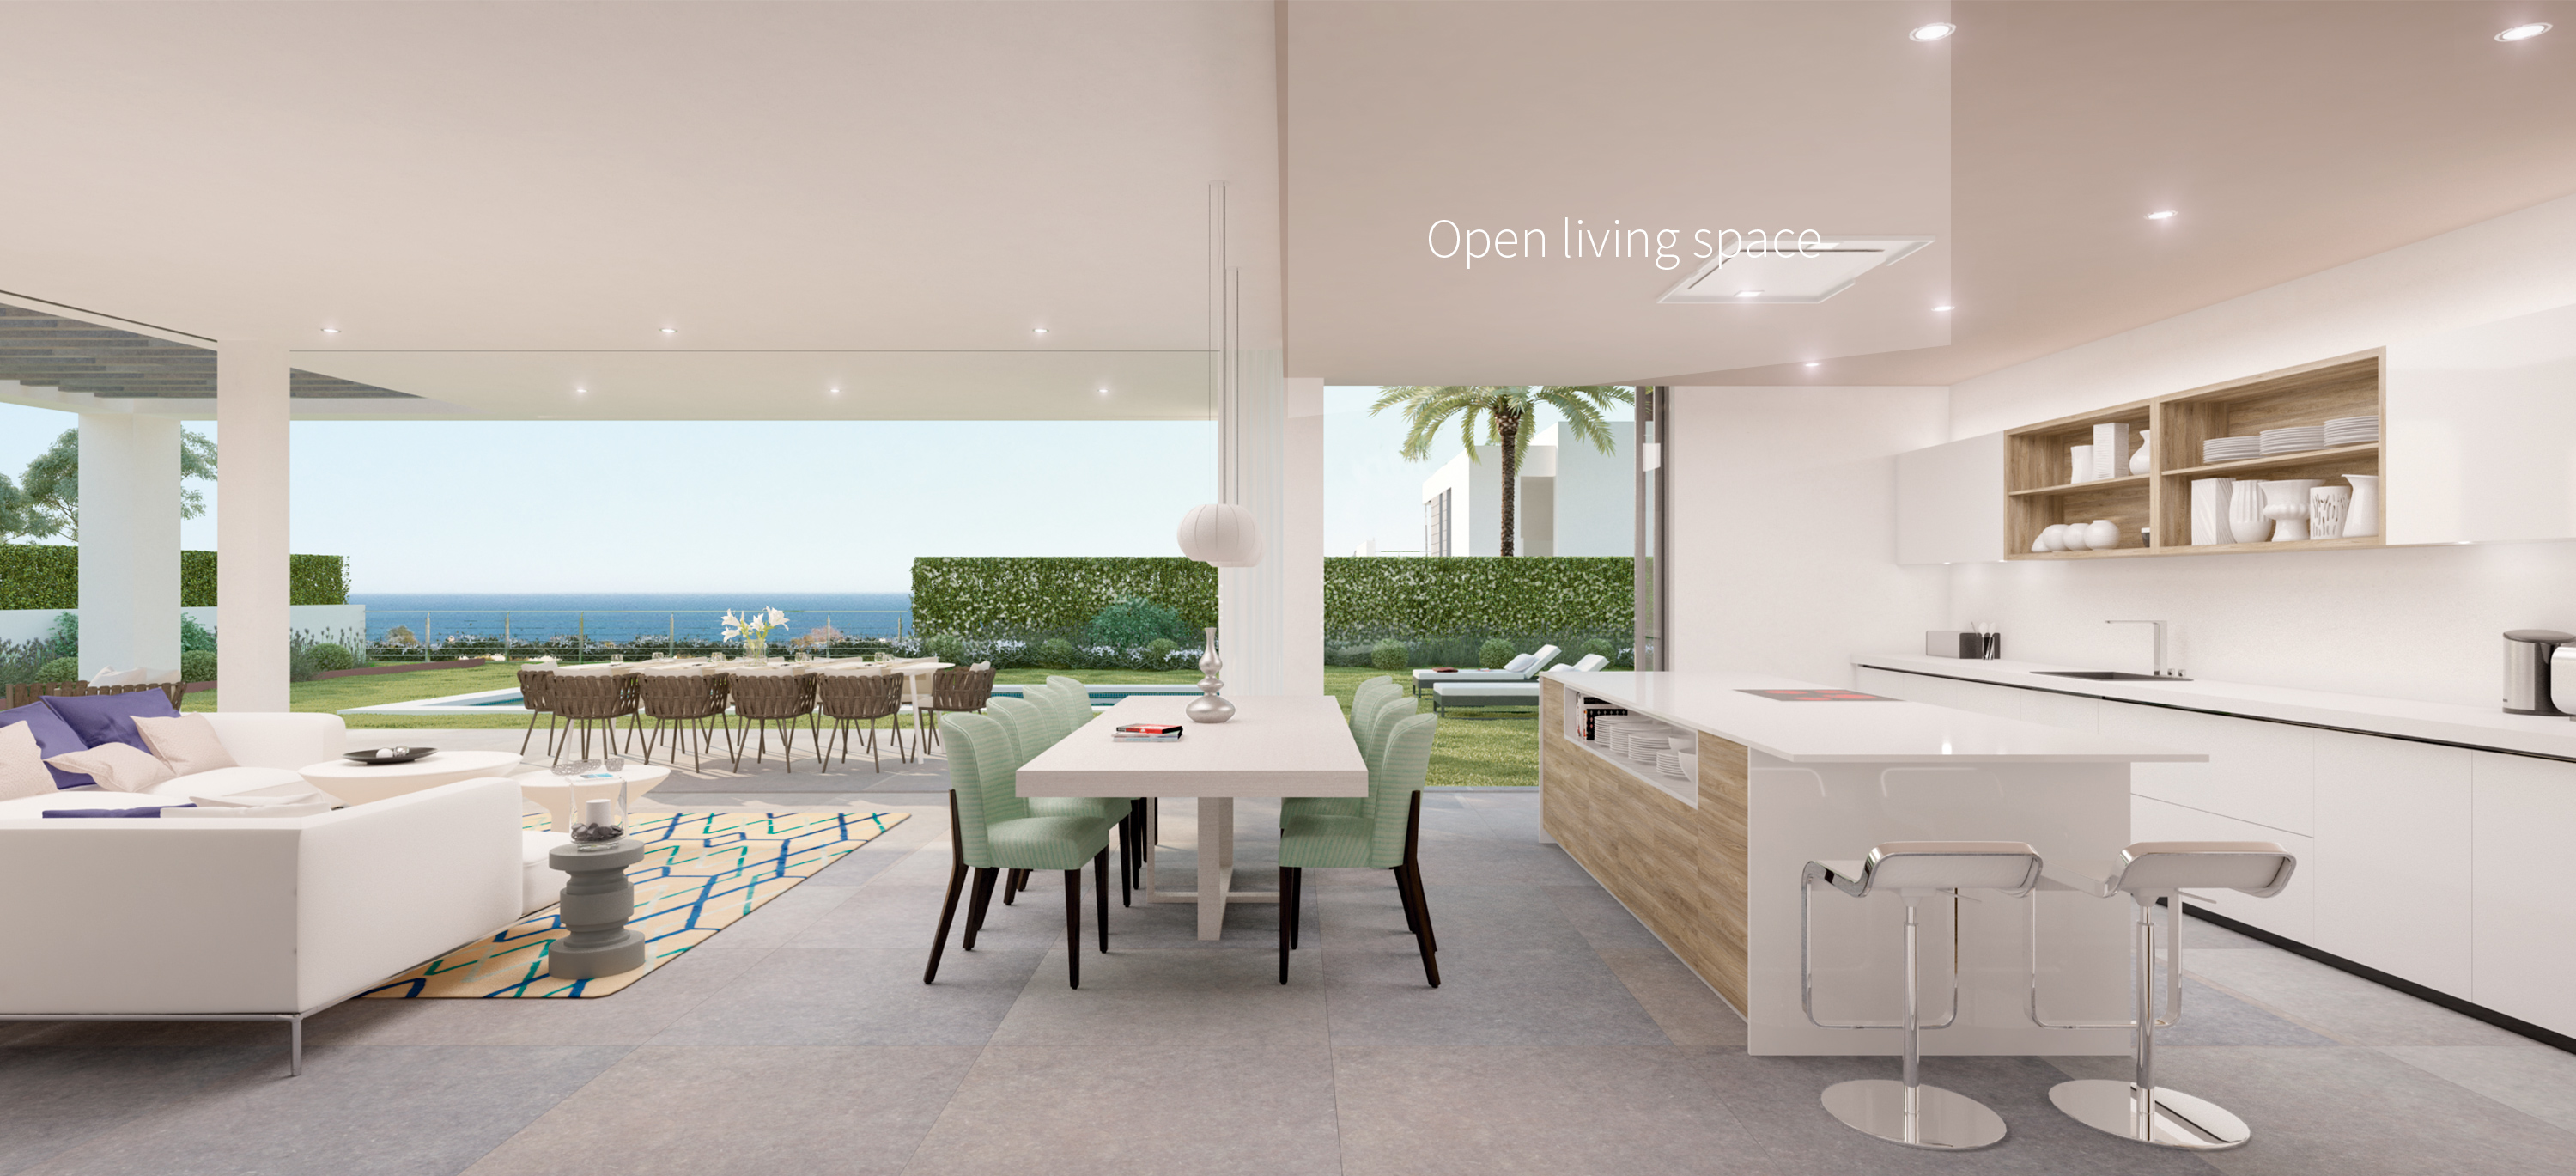 Open living space